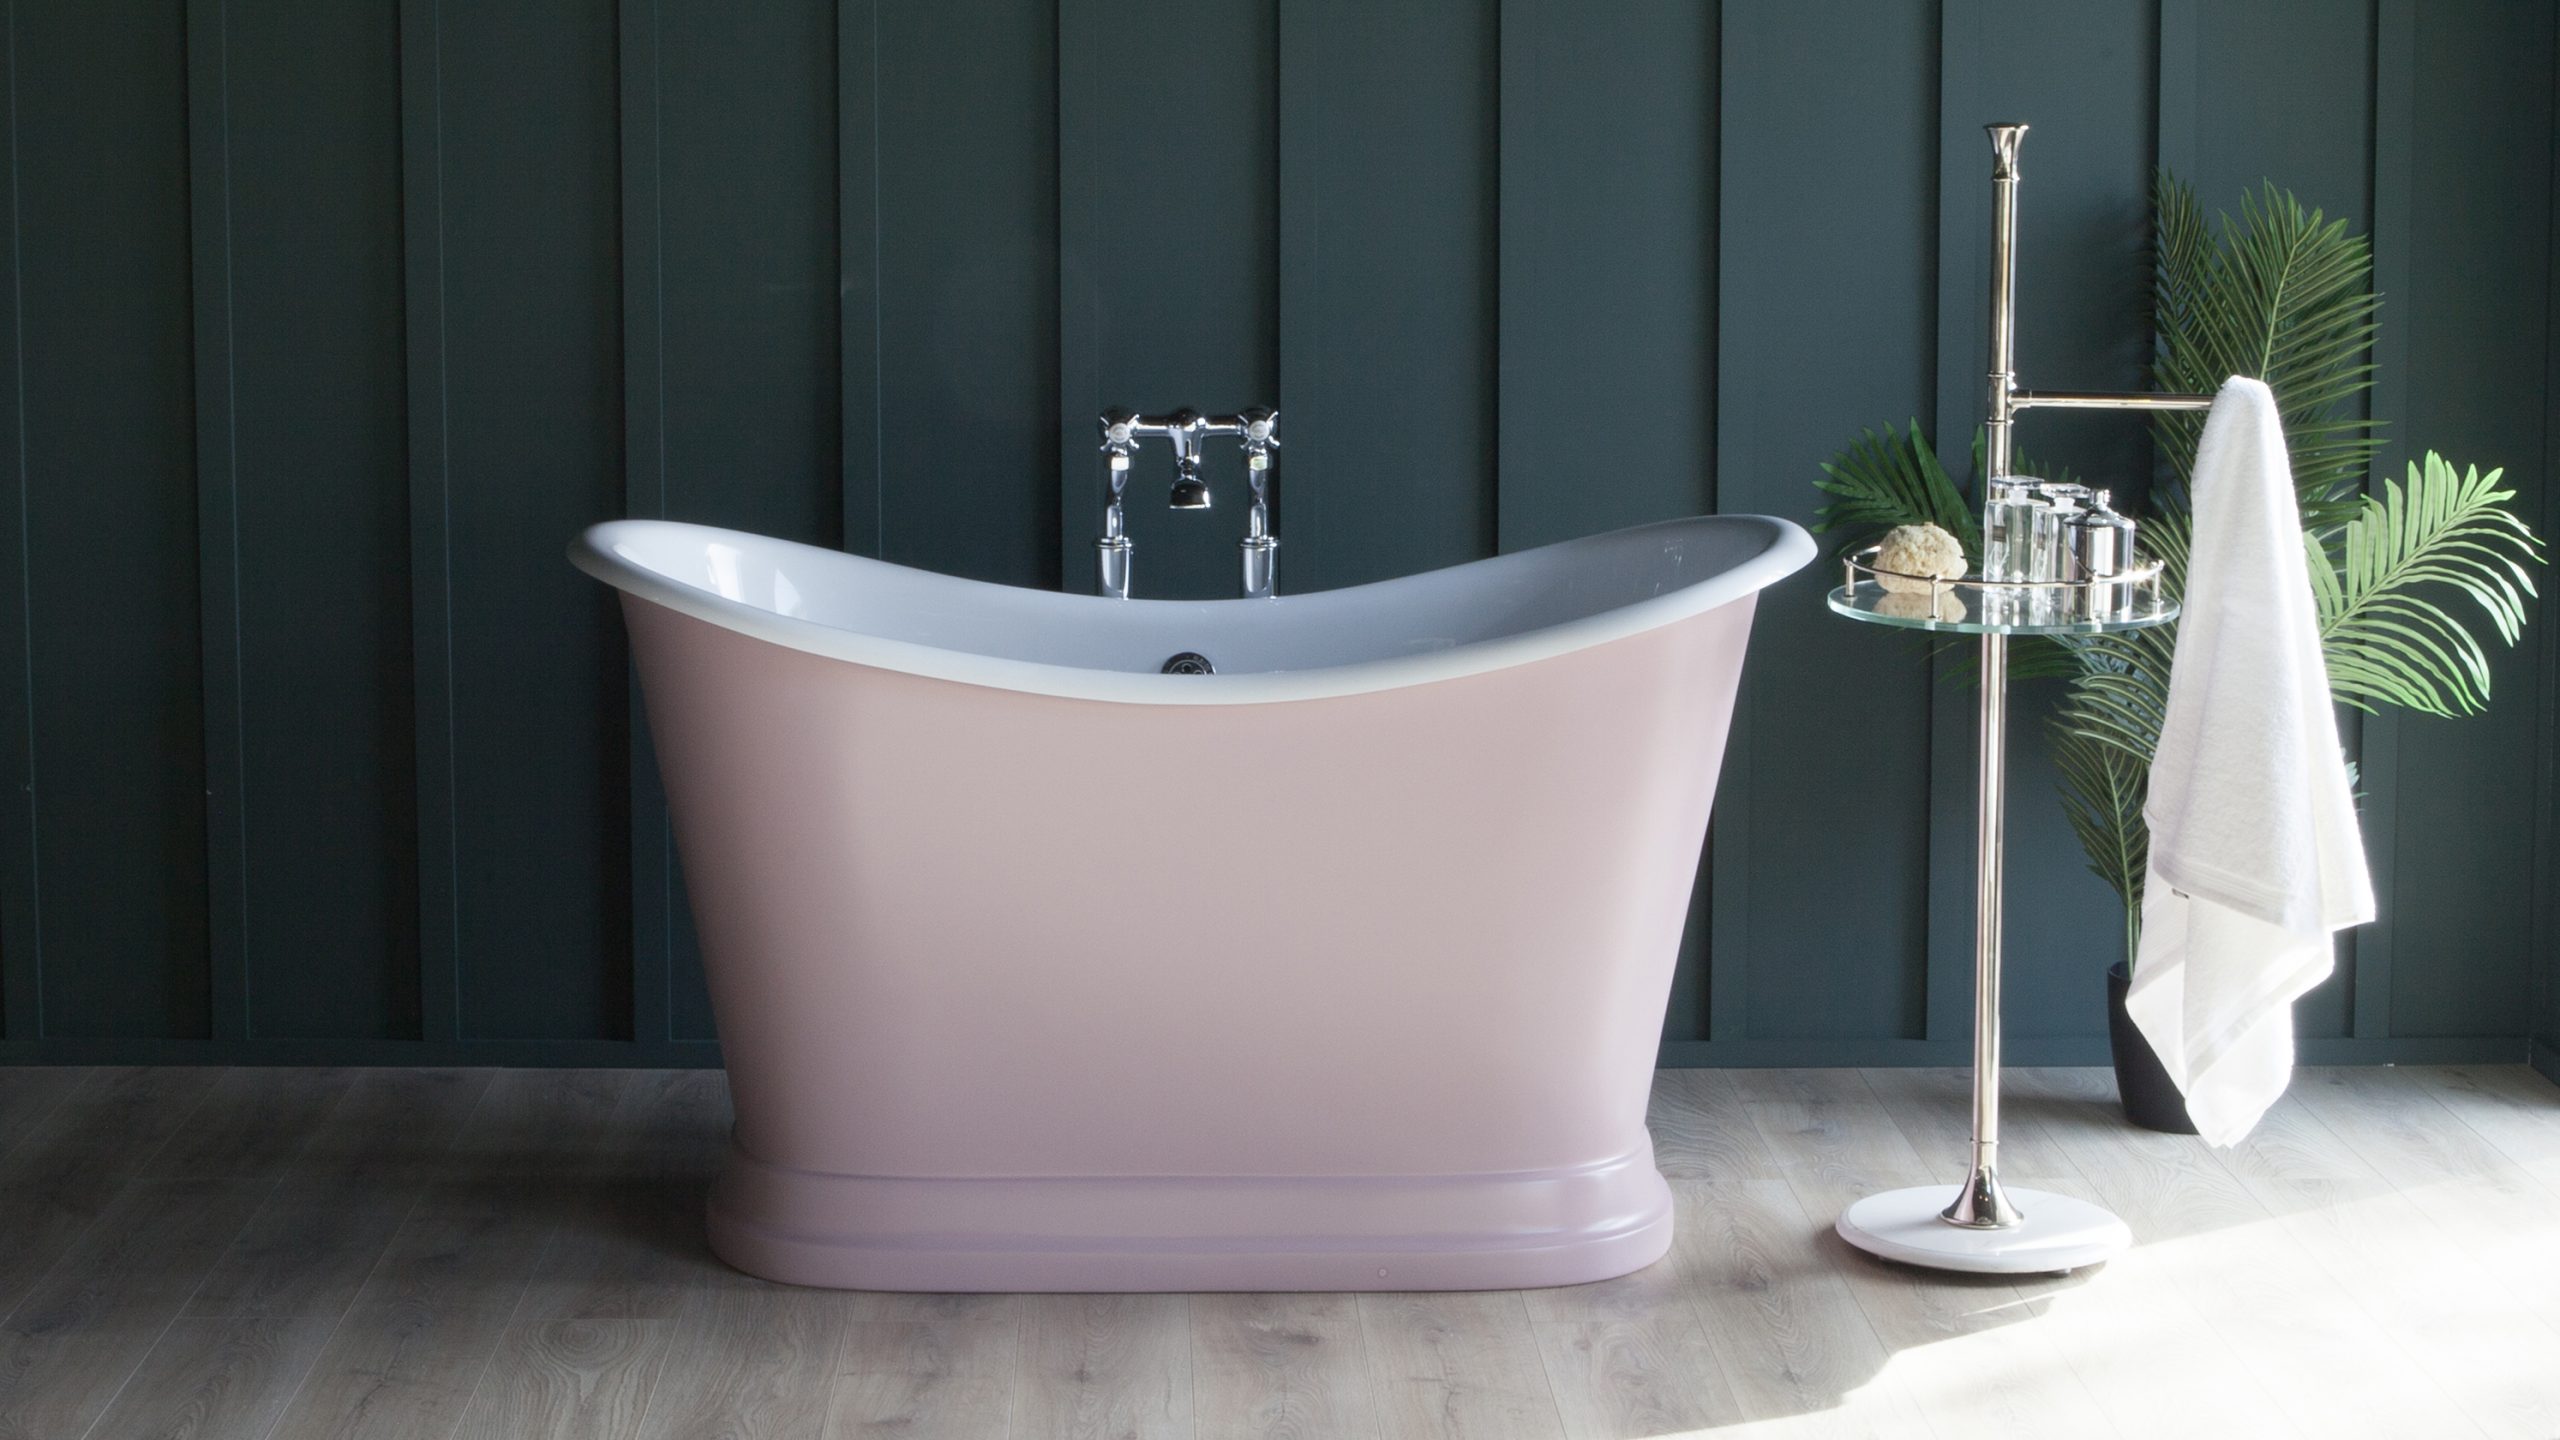 Torre Duo double ended bath front on view. Bath shown with painted exterior.